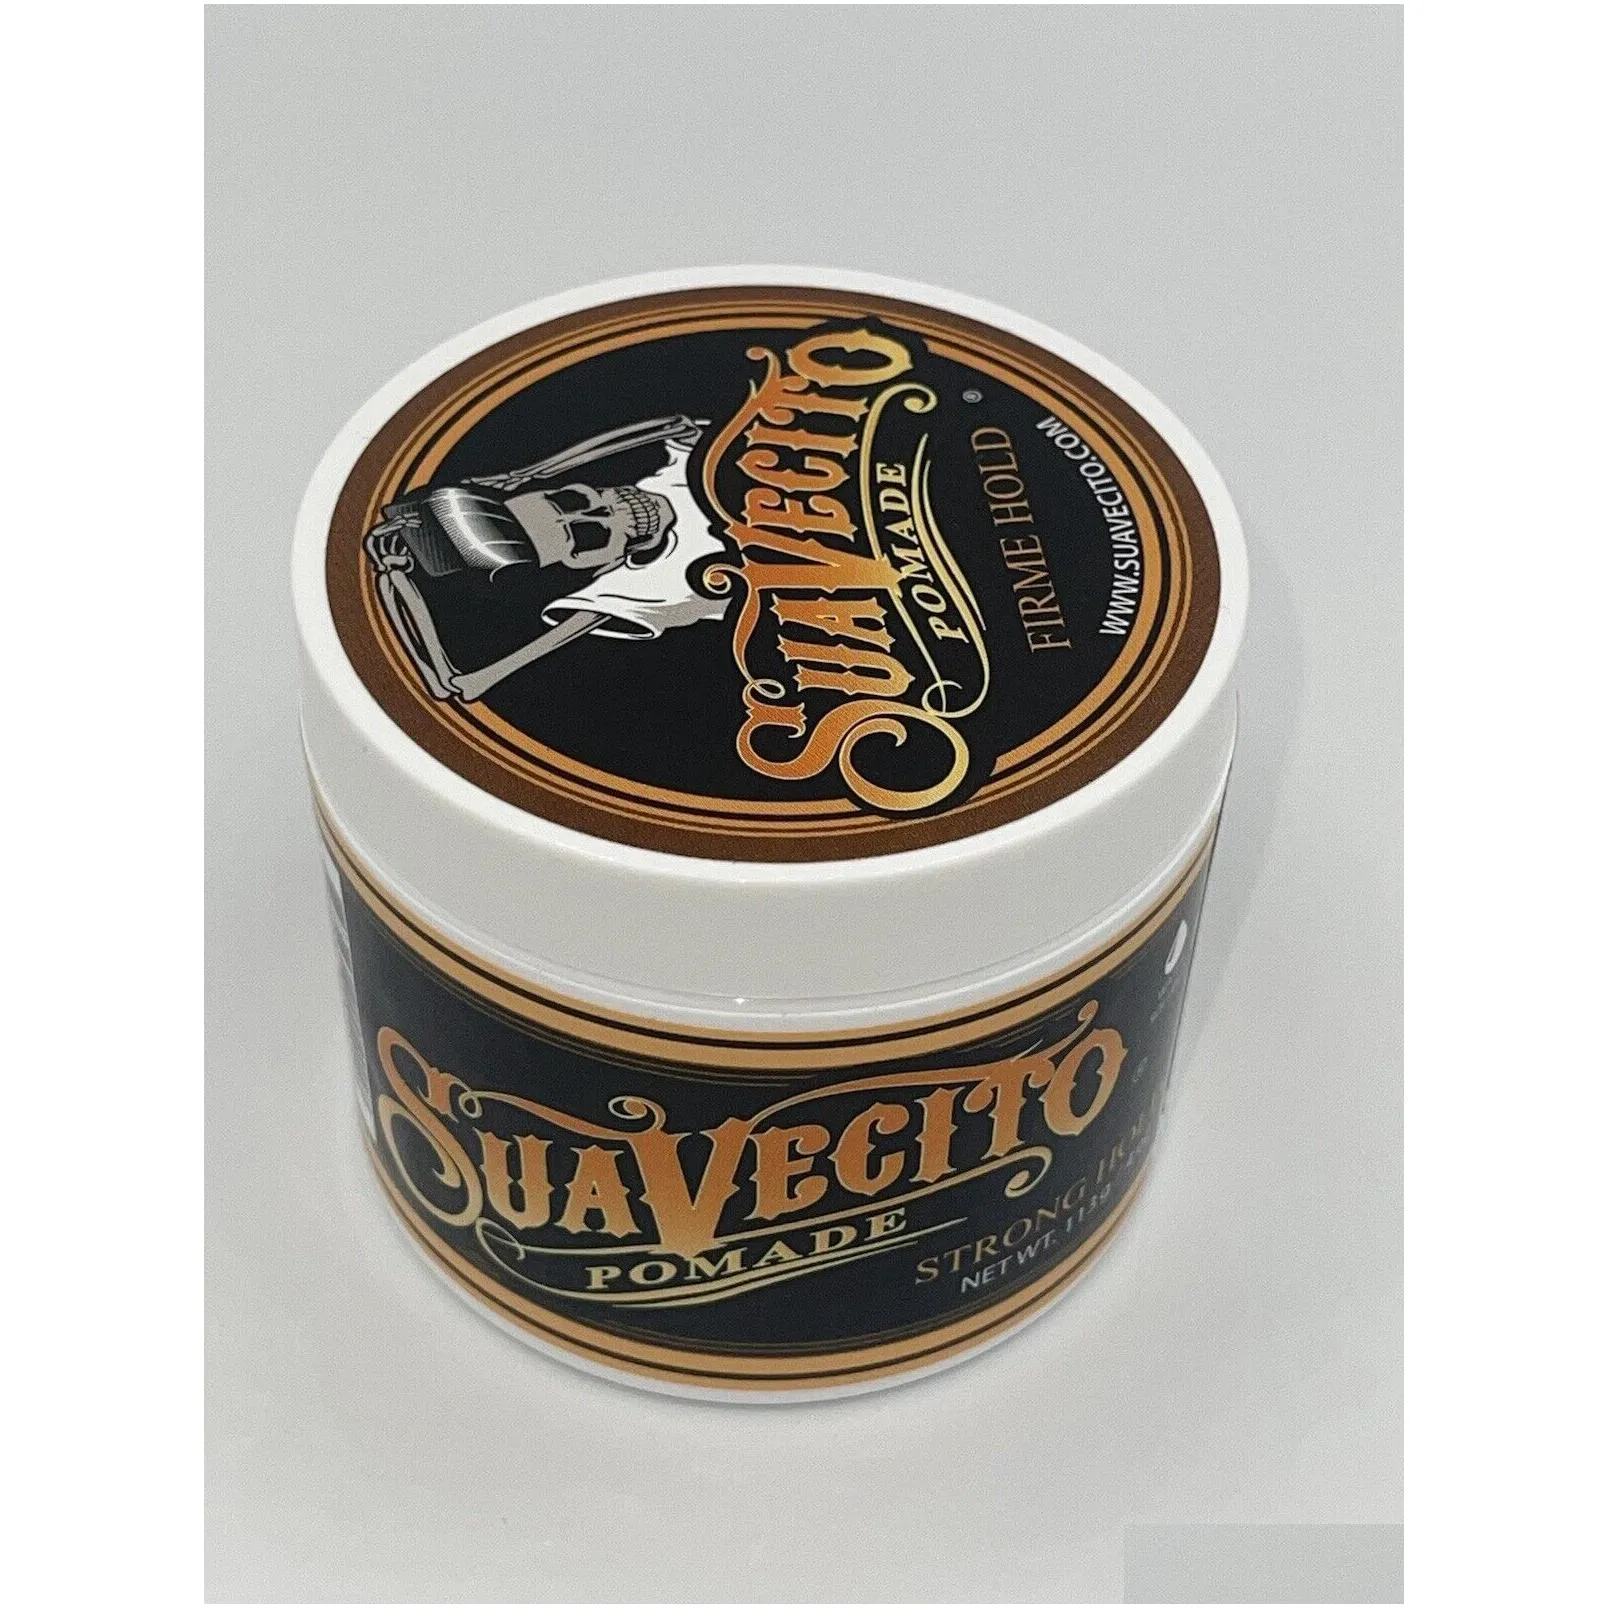 Pomades & Waxes Suavecito Pomade Hold 4 Oz Strong Firme Hair Oil Wax Mud Gel 113G Drop Delivery Hair Products Hair Care Styling Tools Dhlyq